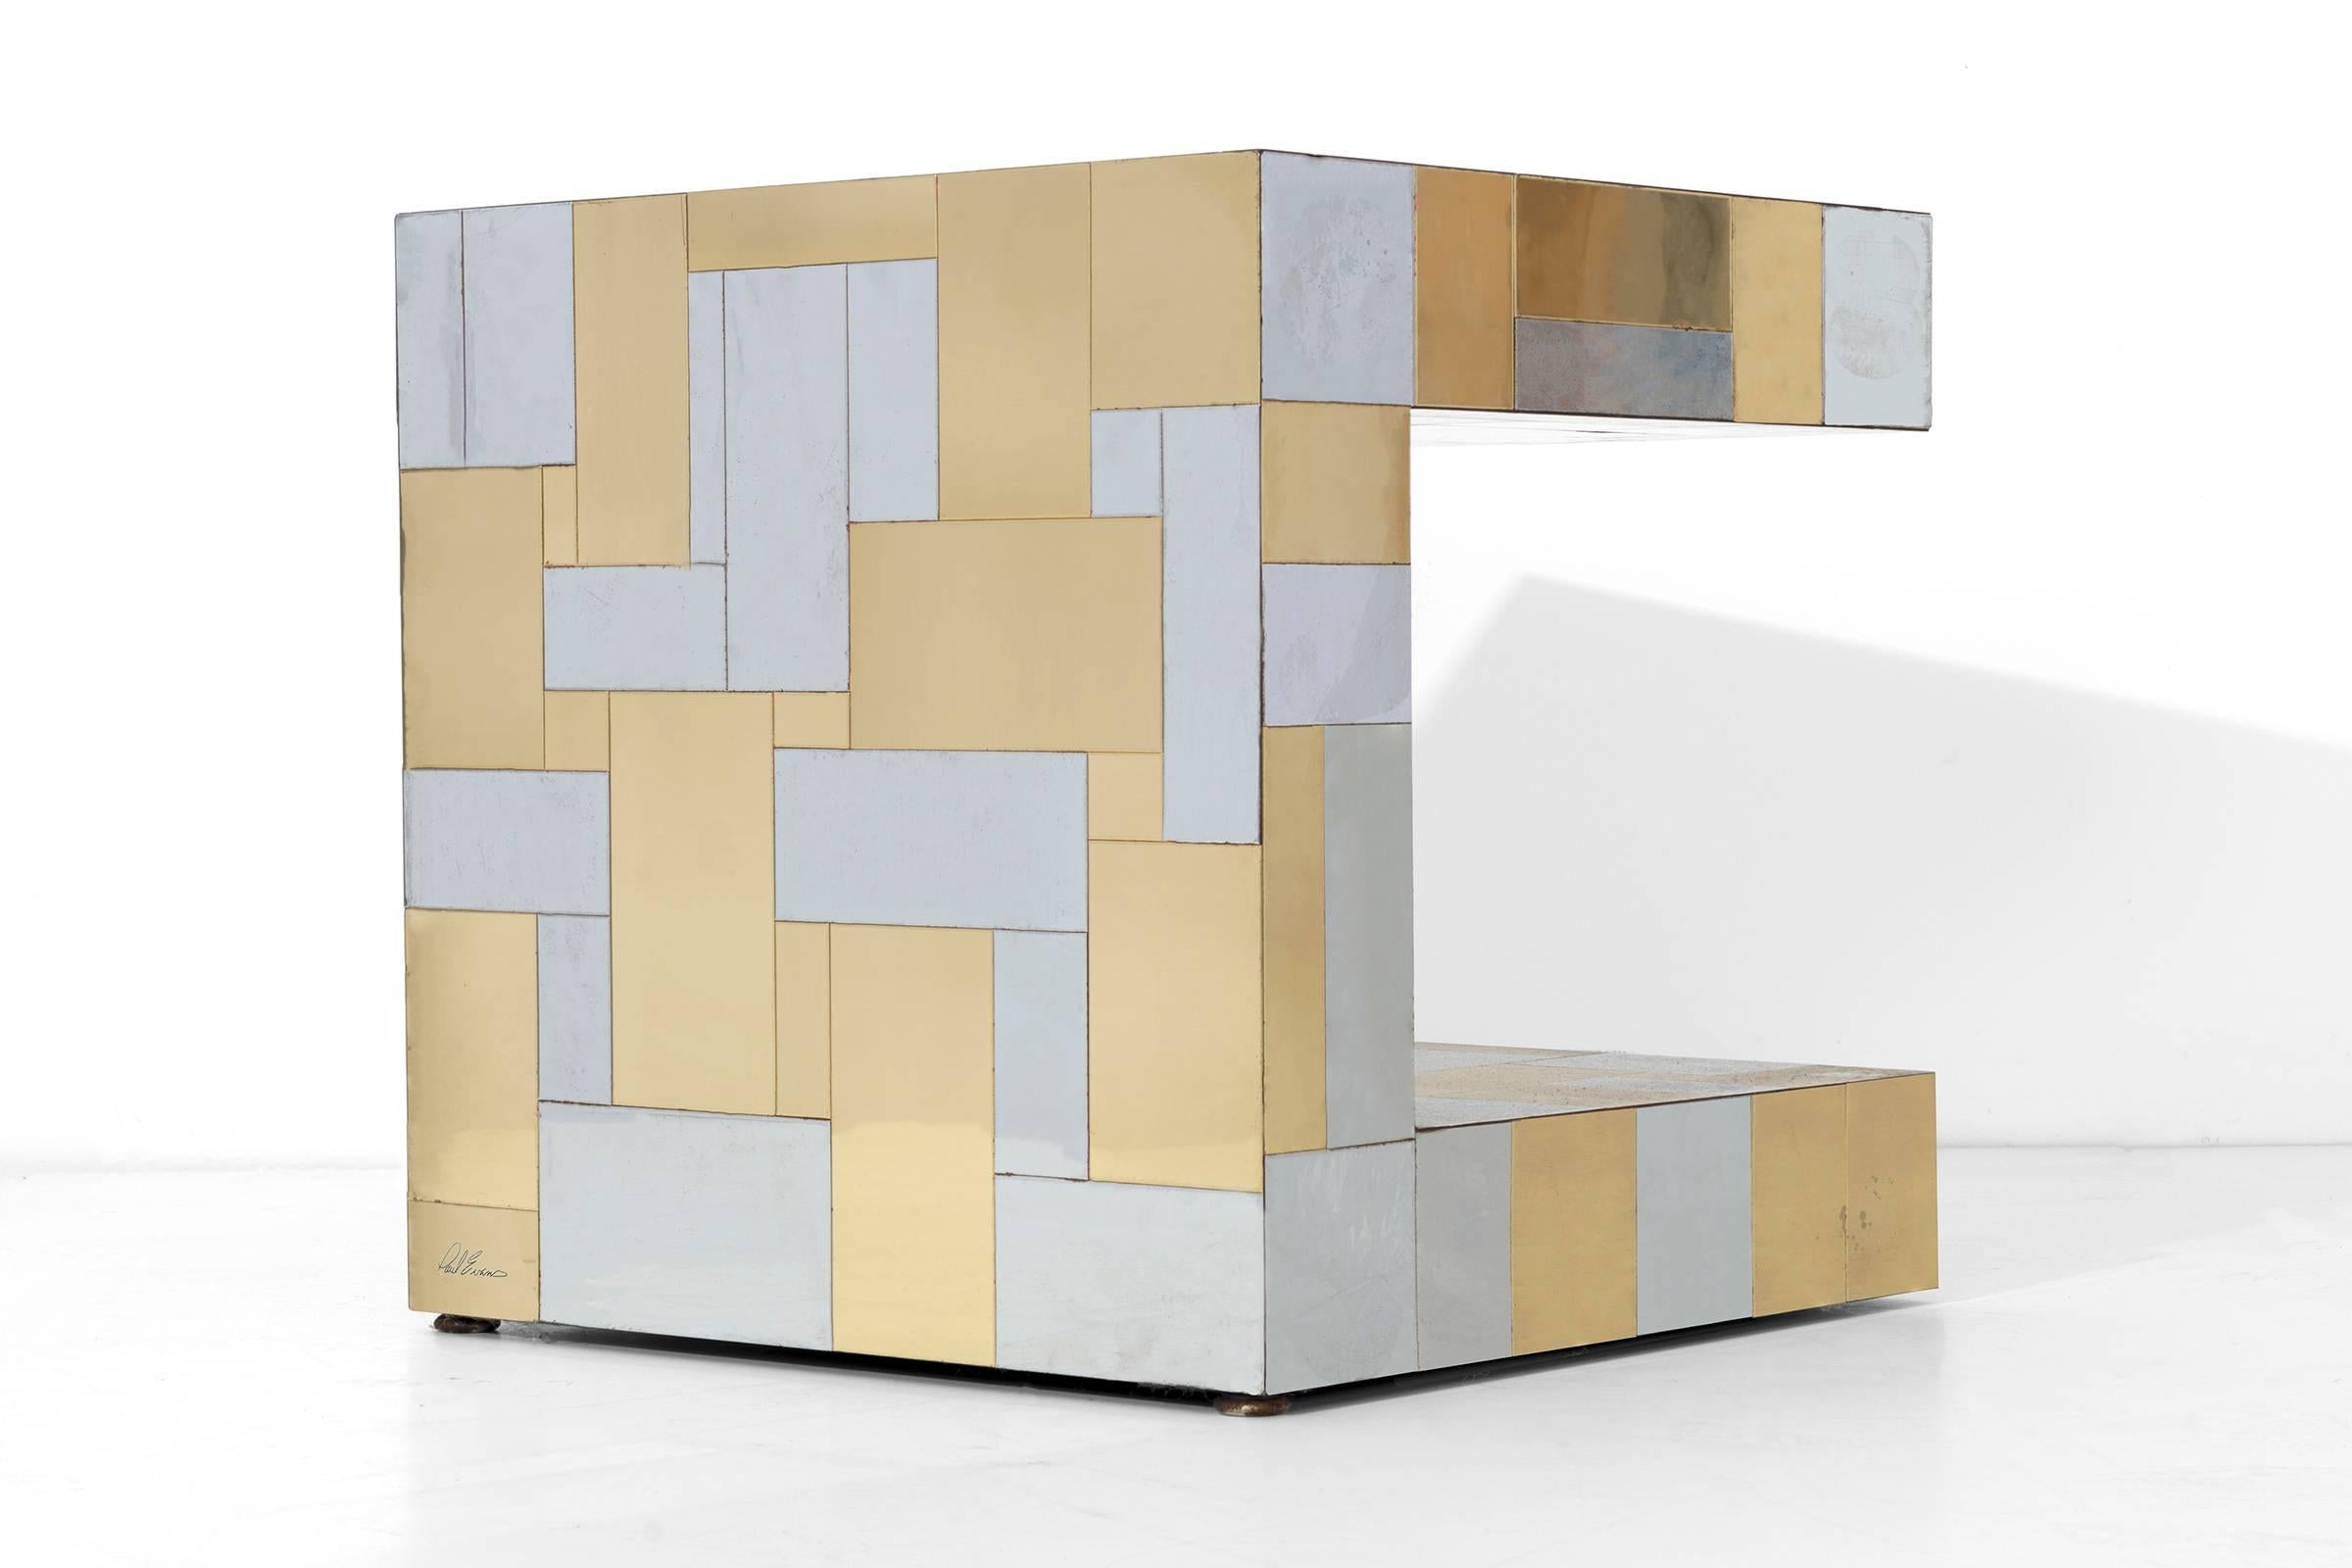 'C' shaped Paul Evans Cityscape side table, covered in polished steel and brass tiles.